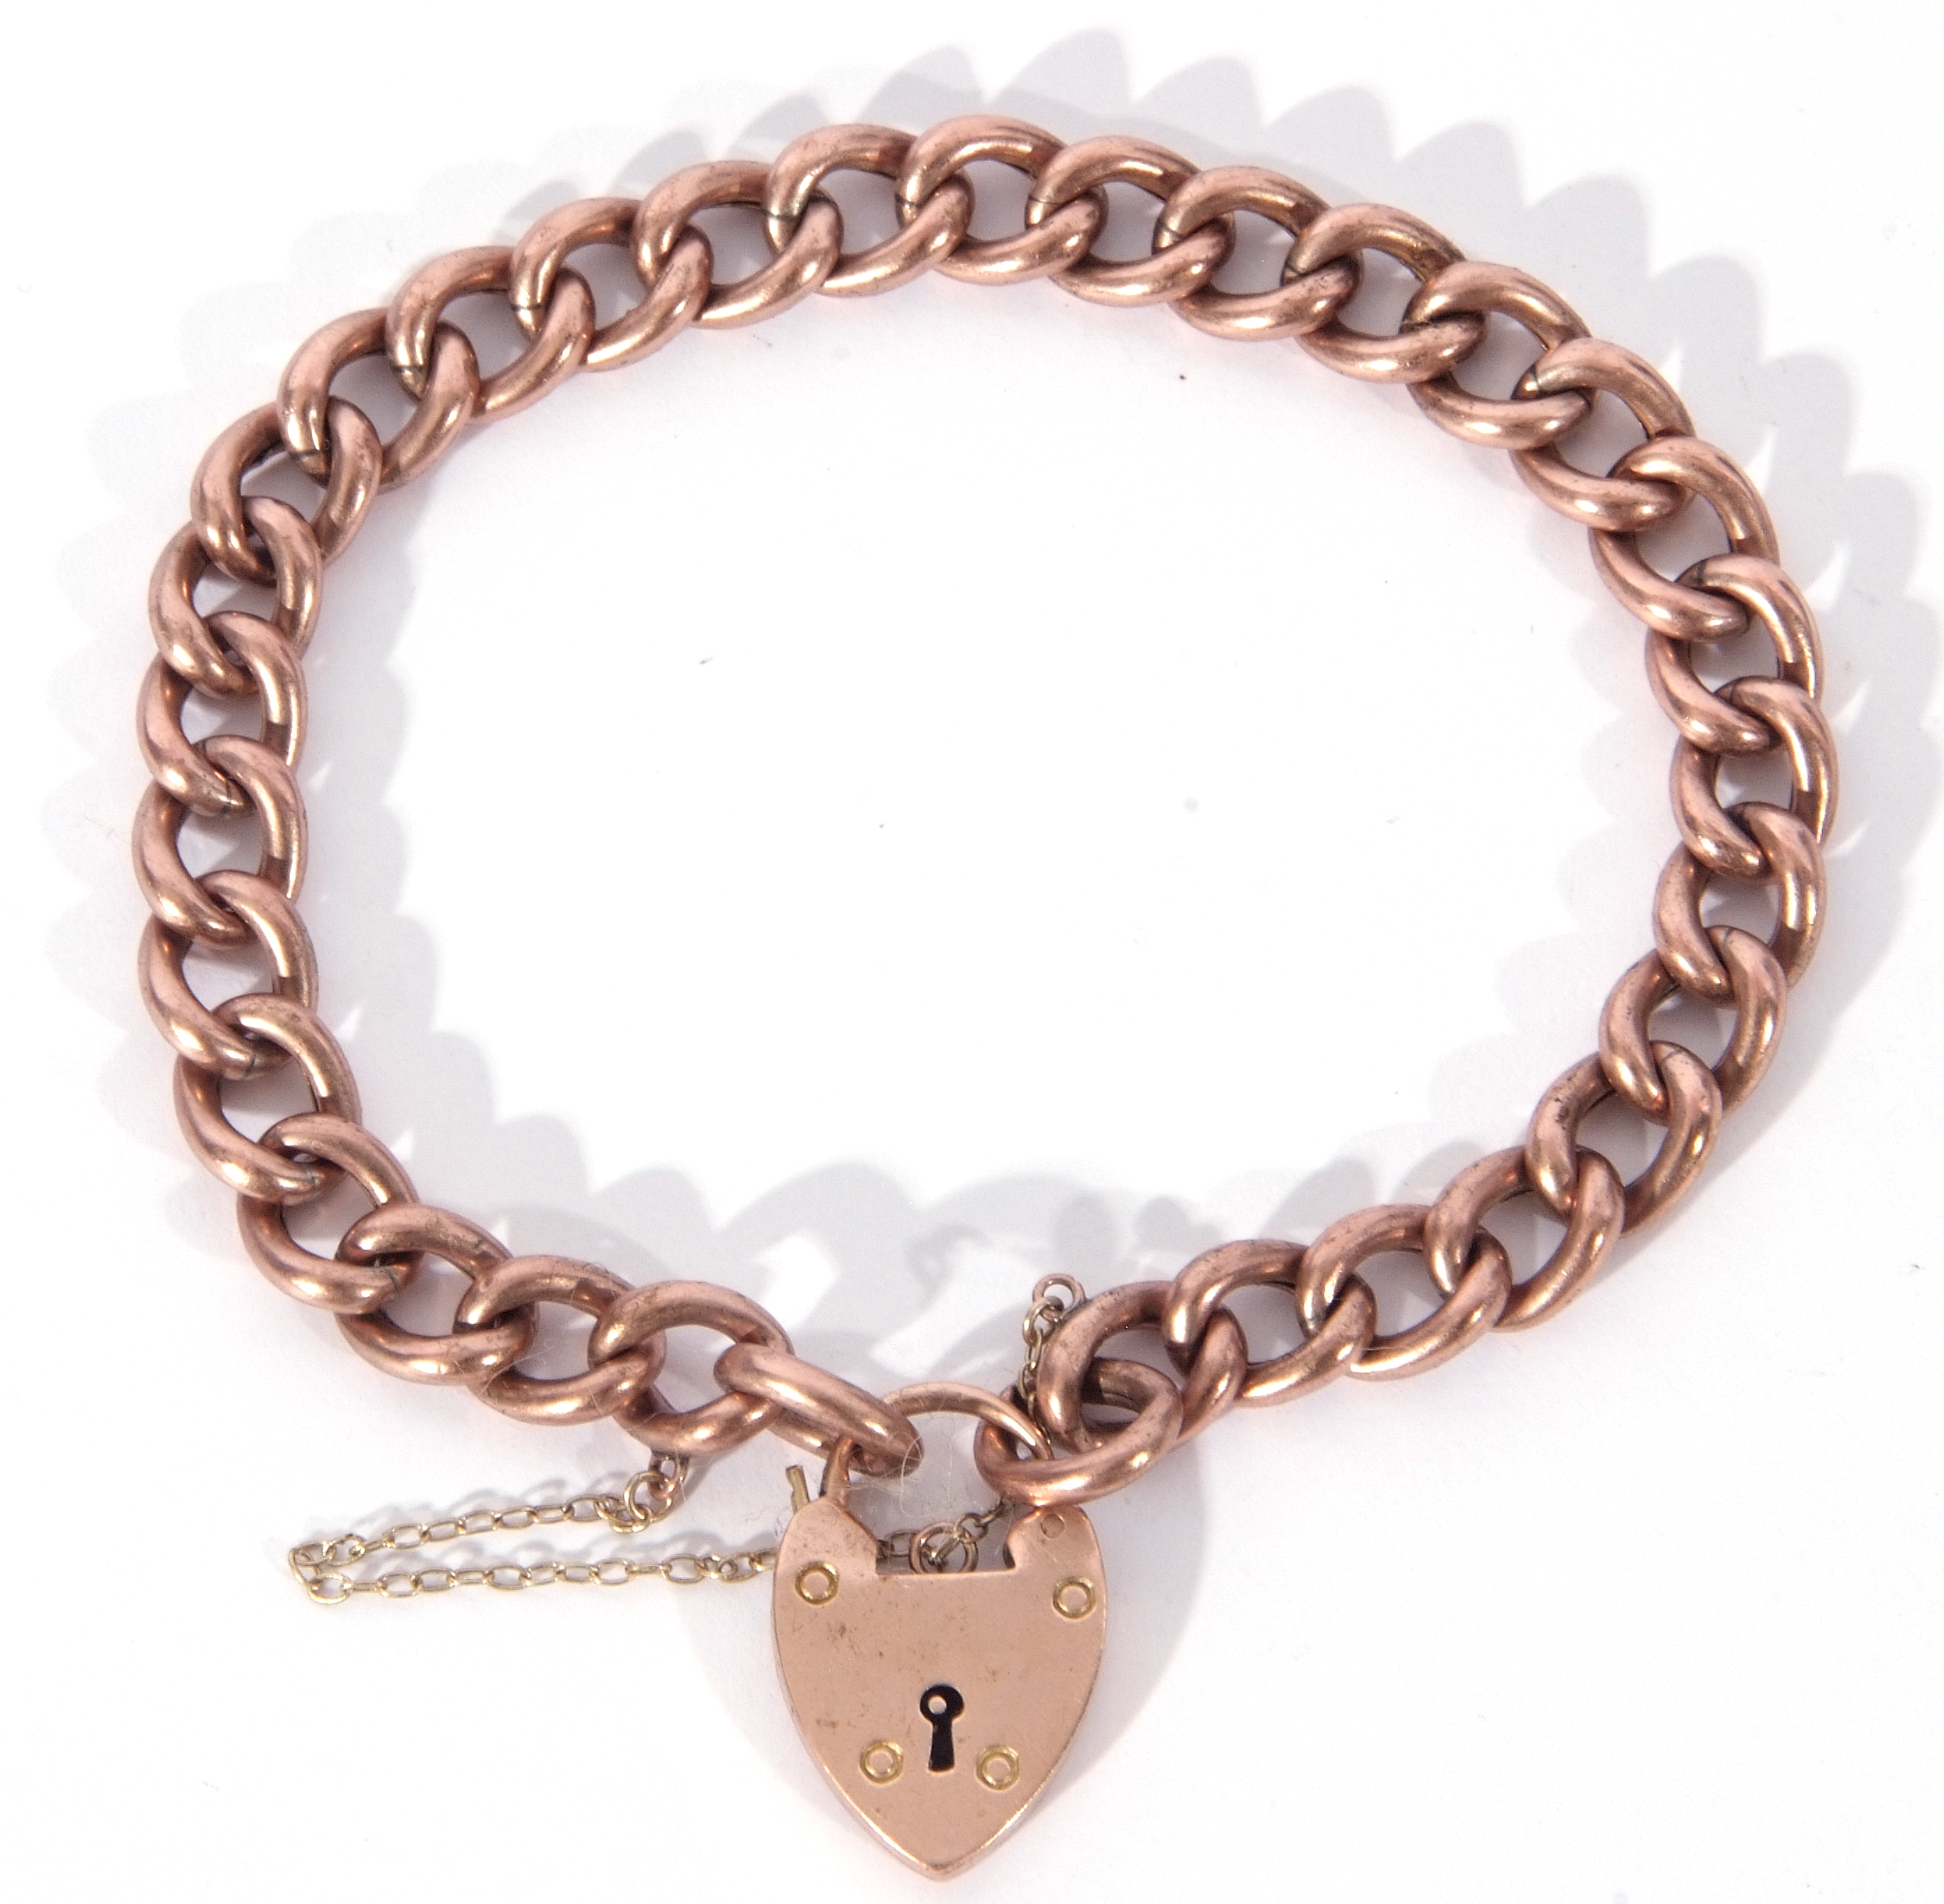 Antique 9ct gold curb link bracelet, rose coloured, heart and safety chain fitting, 14.3gms